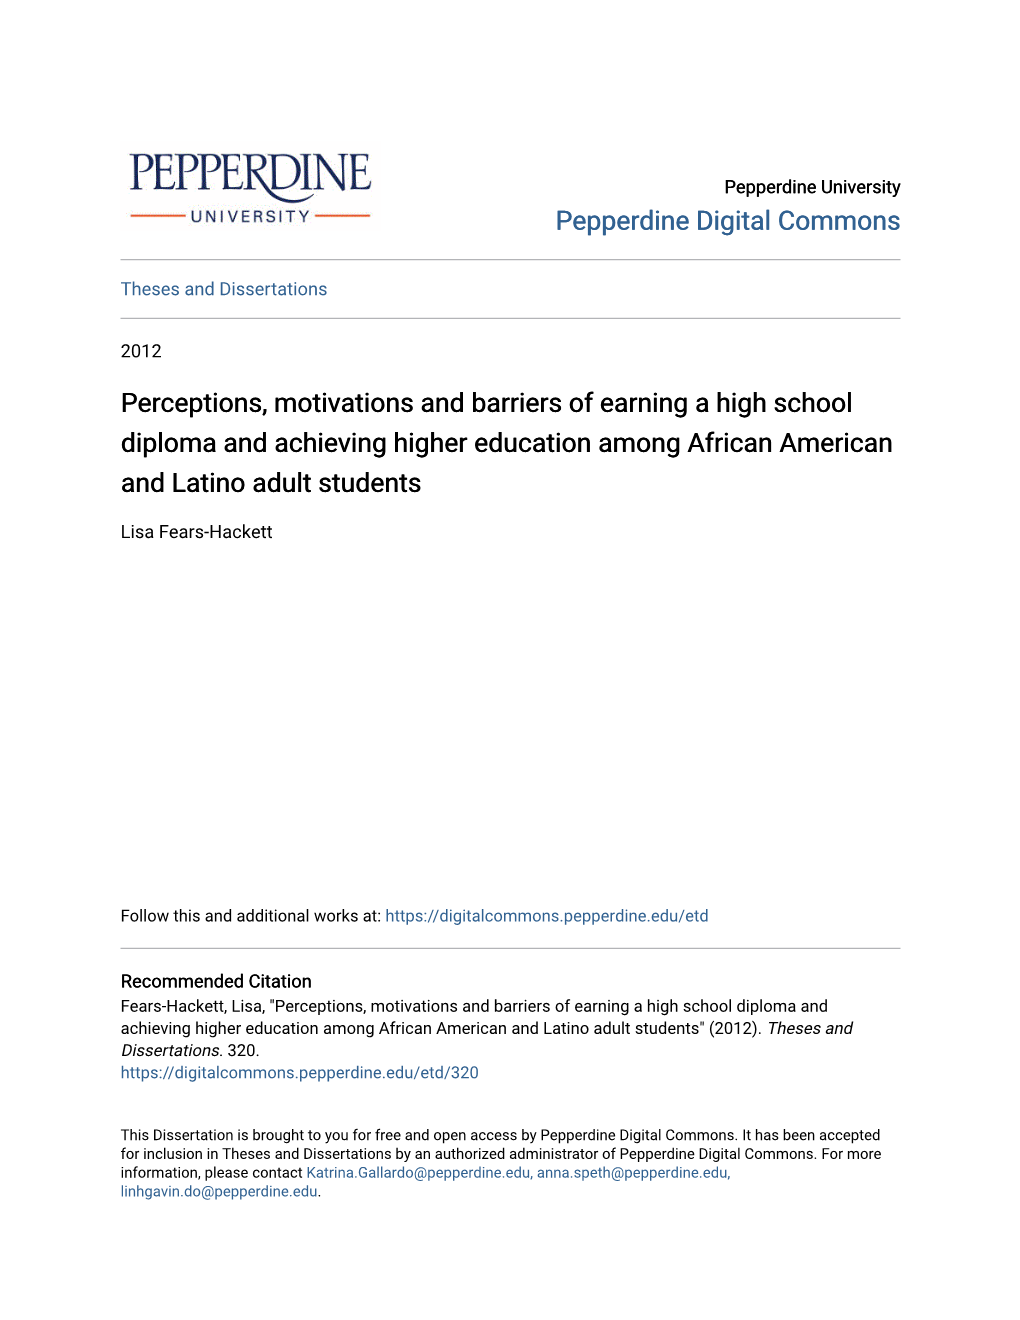 Perceptions, Motivations and Barriers of Earning a High School Diploma and Achieving Higher Education Among African American and Latino Adult Students